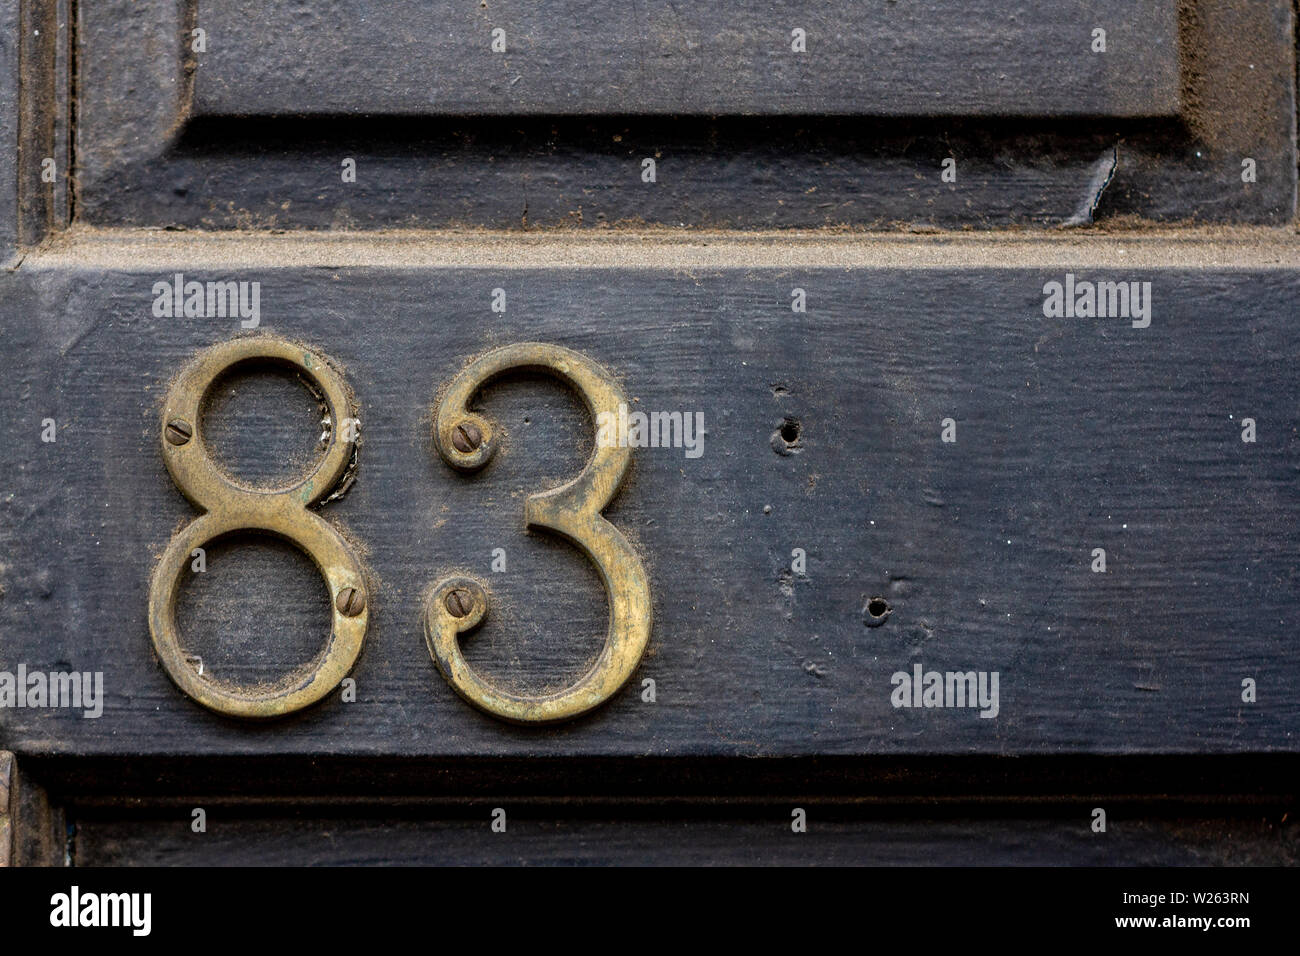 House number 83 with the eighty-three in metal digits on a wooden front door Stock Photo